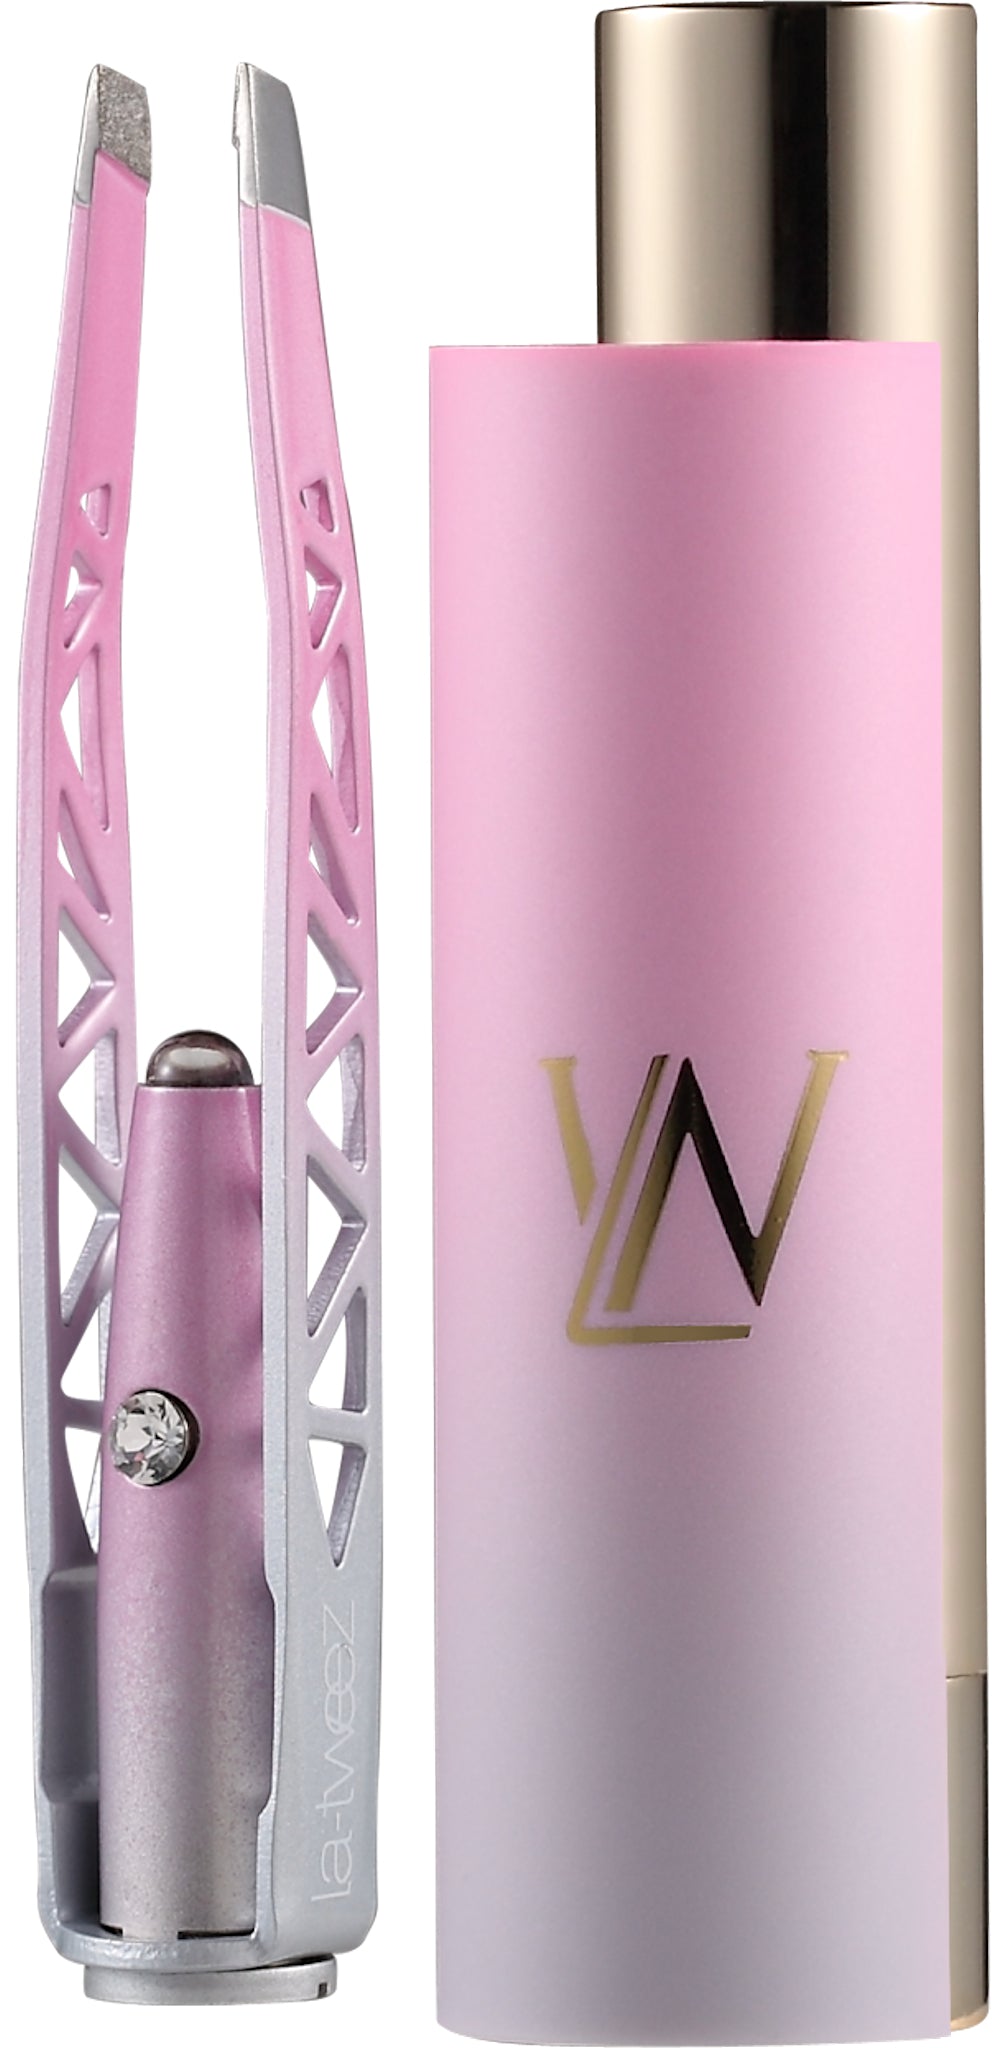 As the ORIGINAL inventors of the illuminating tweezers, nobody does it better than La-tweez! The patented LED light is a signature of La-tweez products giving you the necessary light to tweeze anywhere and everywhere! See the range at https://alida.co.uk/collections/la-tweez including this PINK OMBRE version